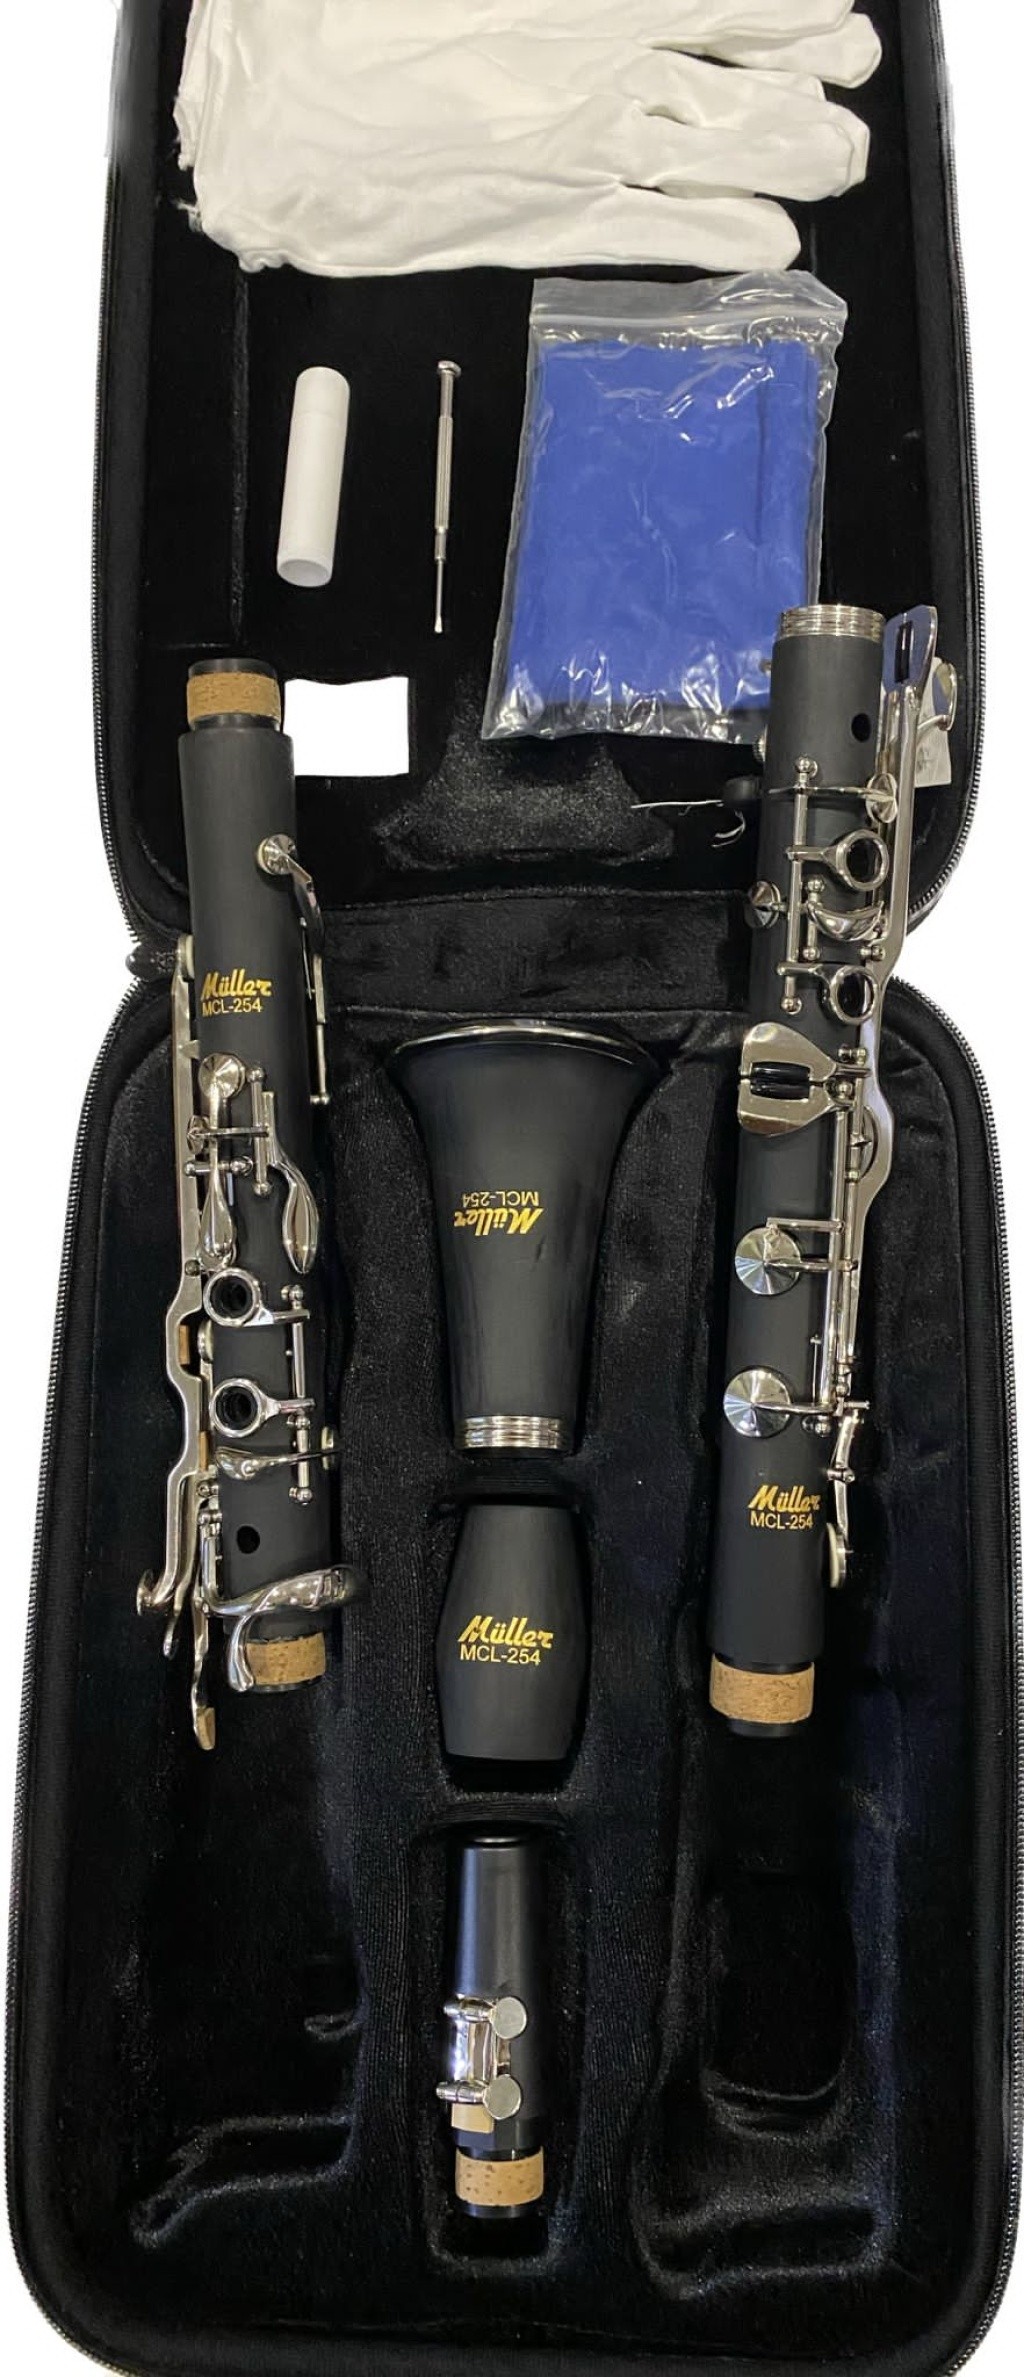 Müller MCL-254 Left Clarinet Luxury Bag